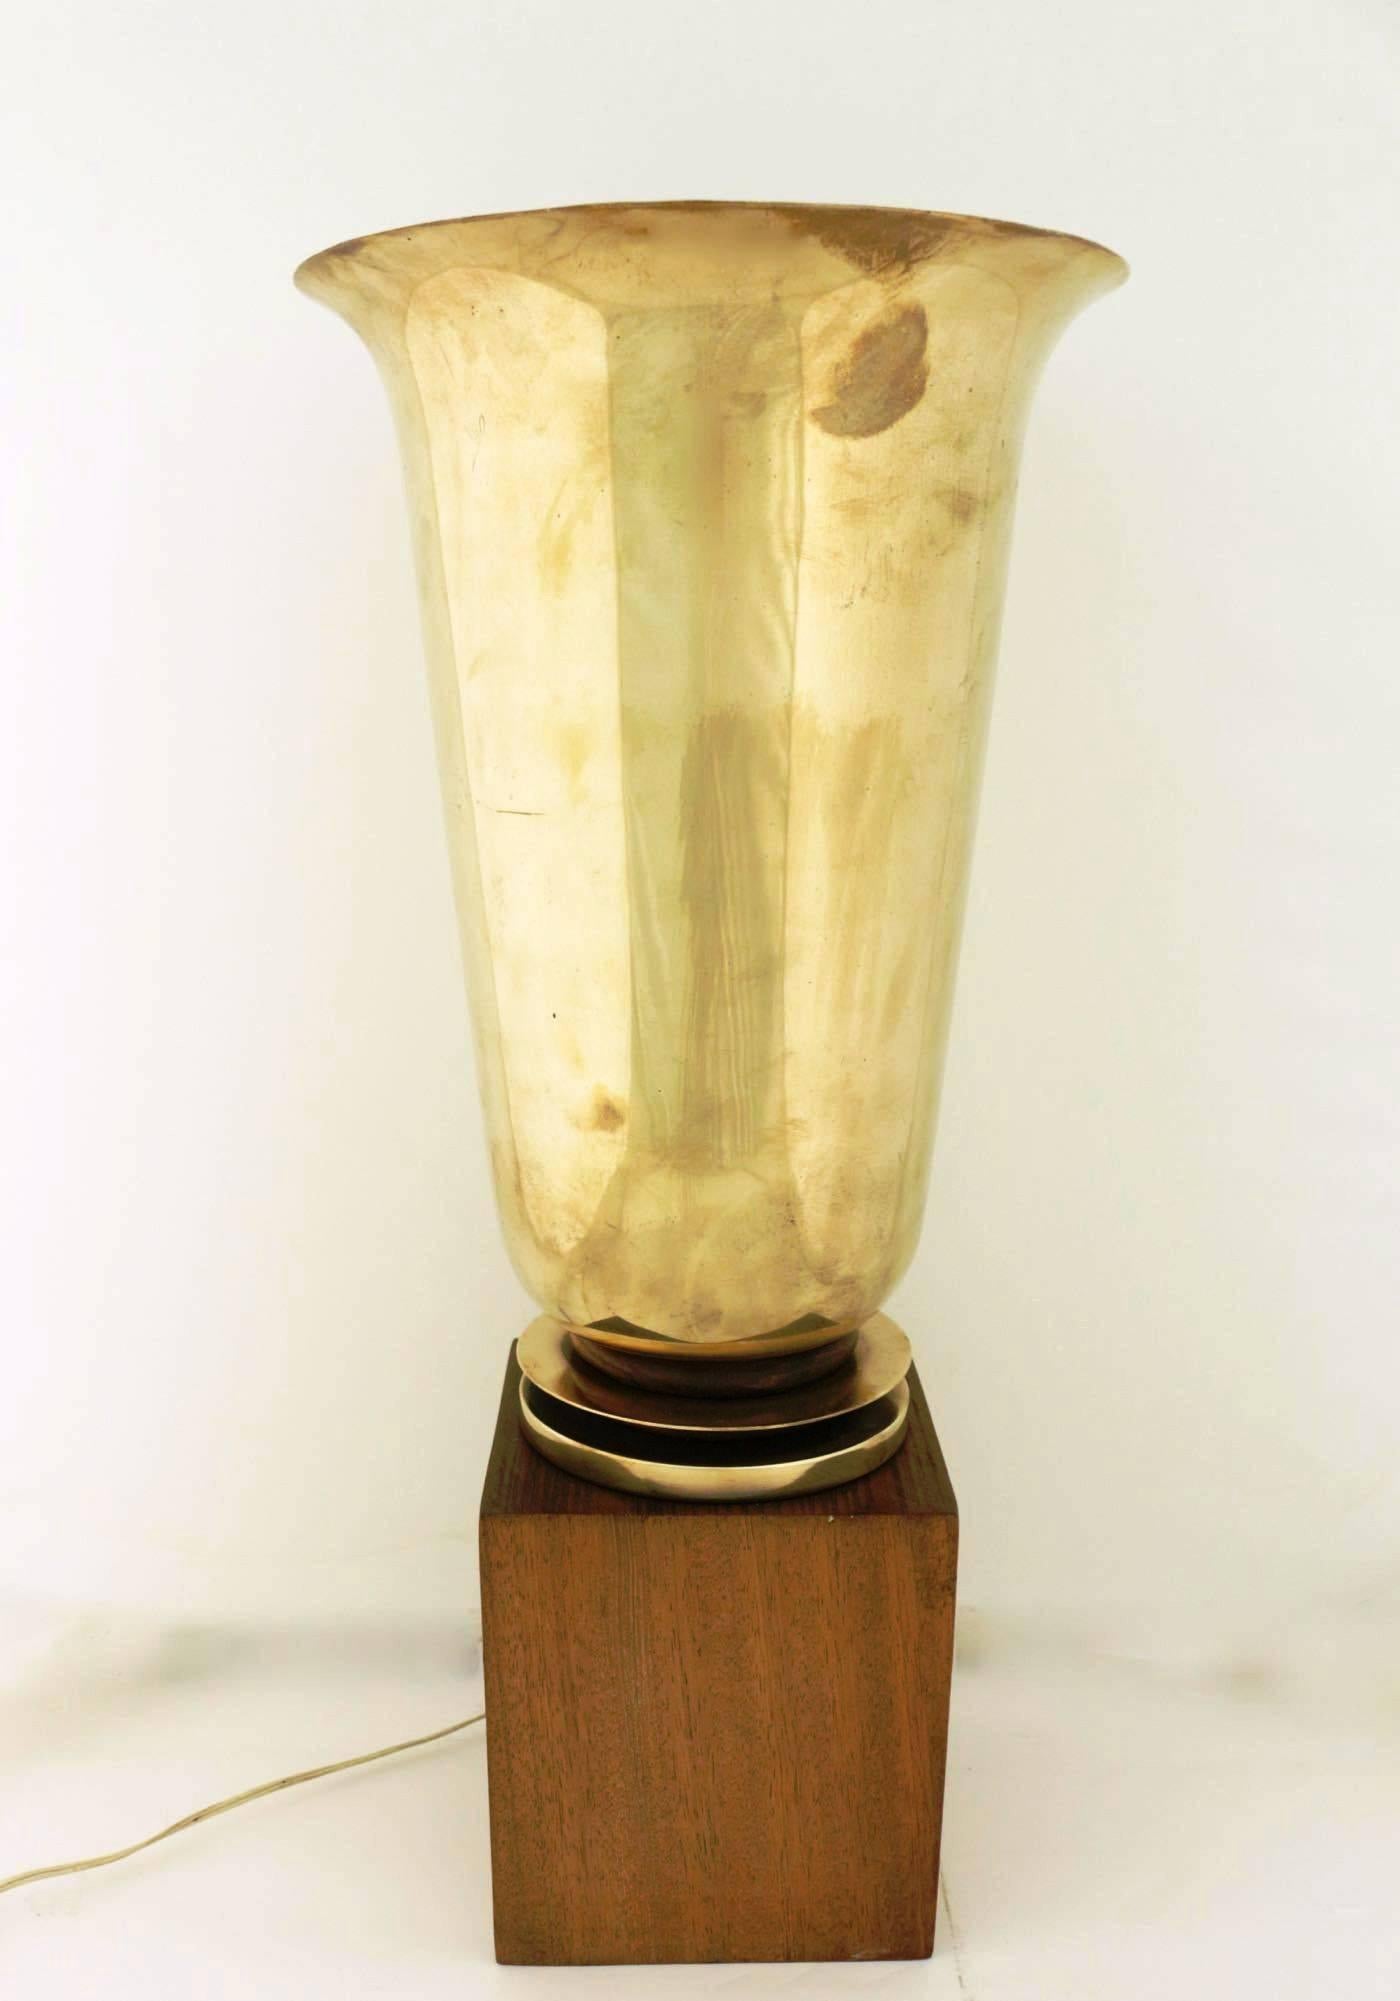 Beautiful Art Deco period table lamp, in the taste of Ruhlmann, France, 1930s
Wood and brass.